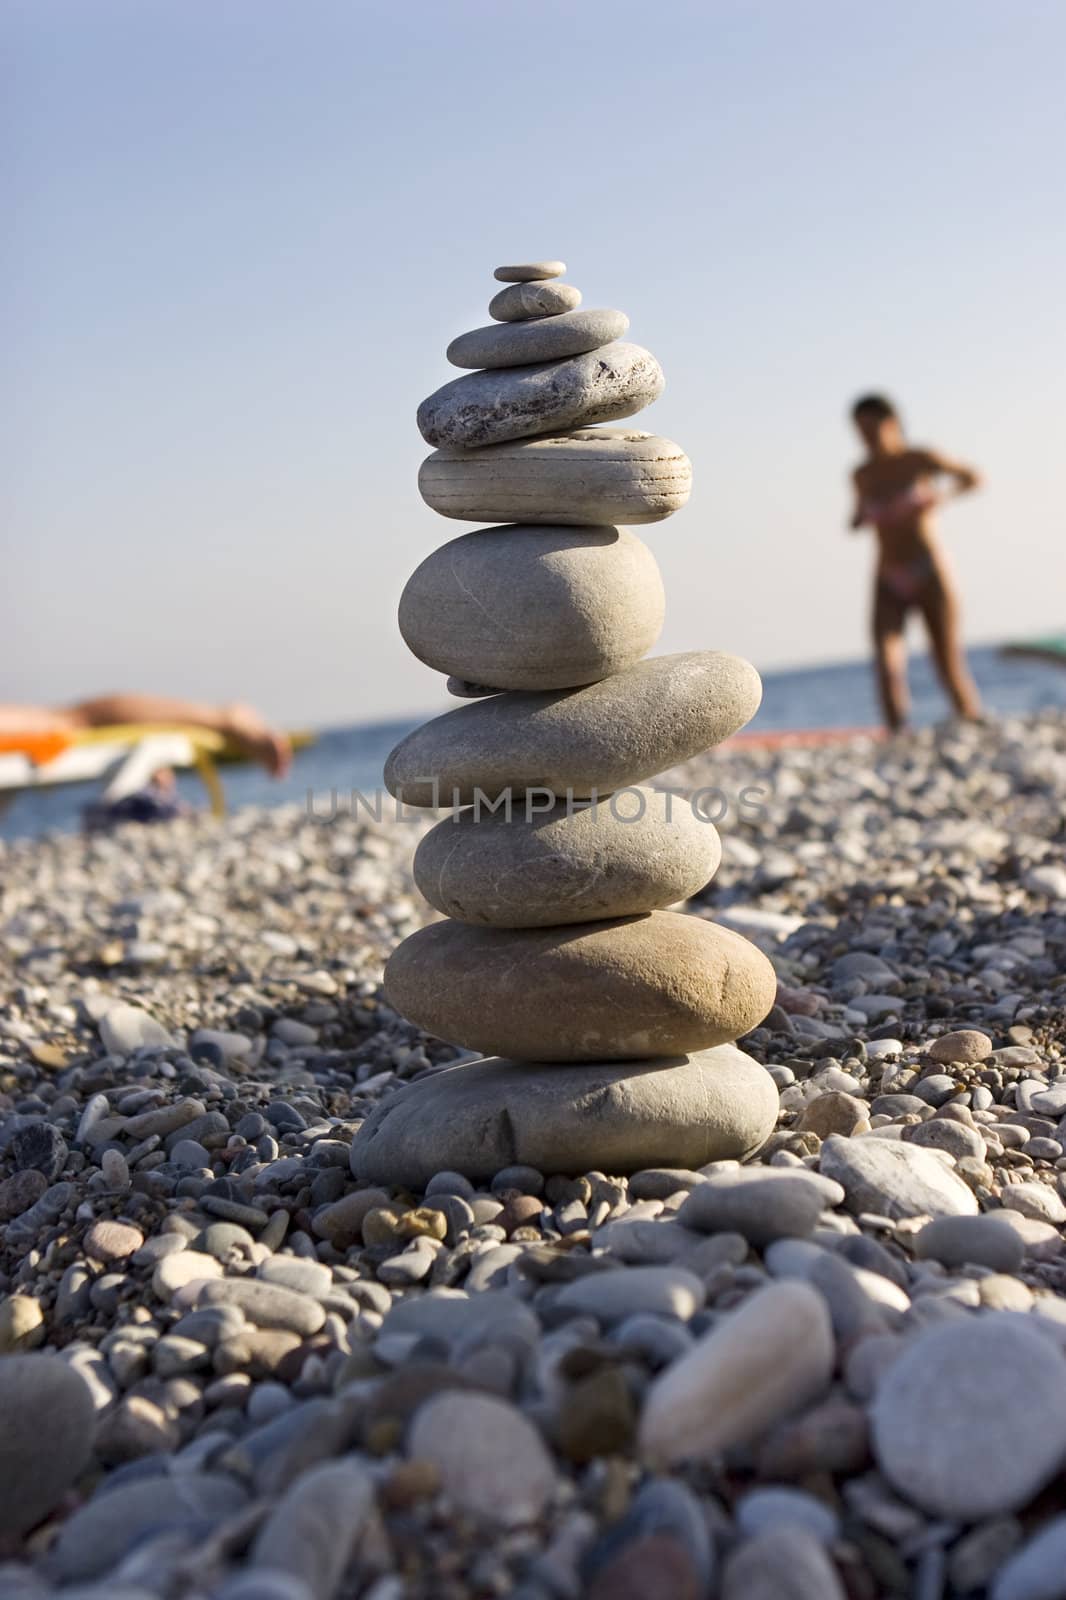 Six differently colored and sized pebbles stacked on a beach by elenarostunova